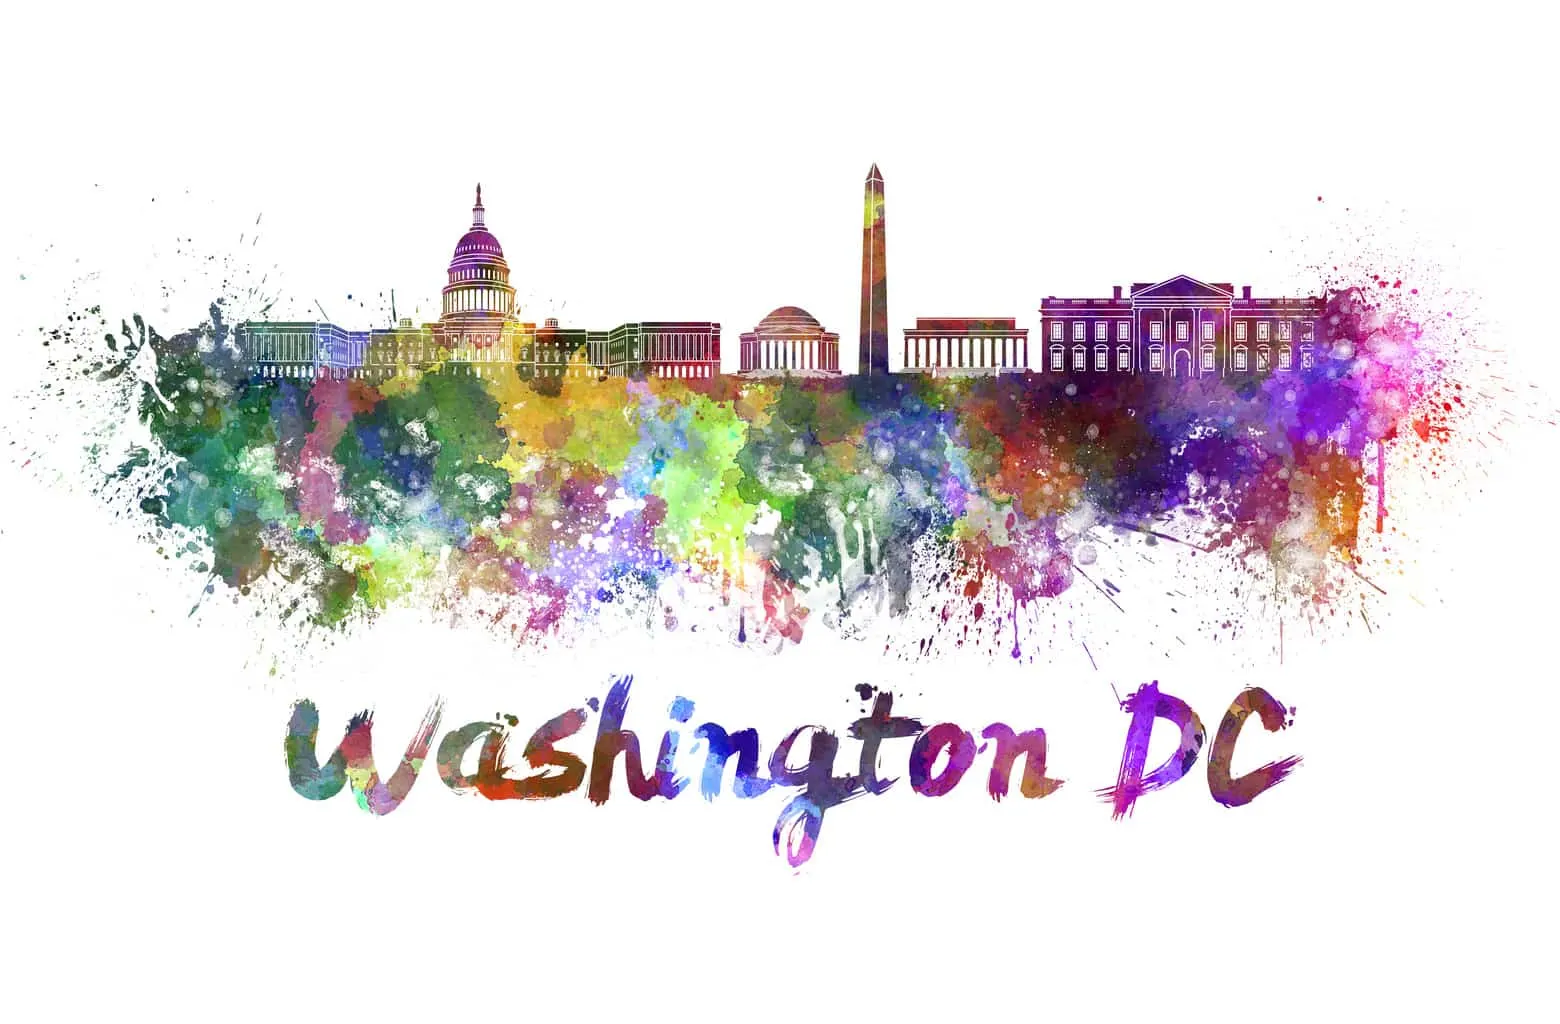 10 Must See Attractions in Washington, DC